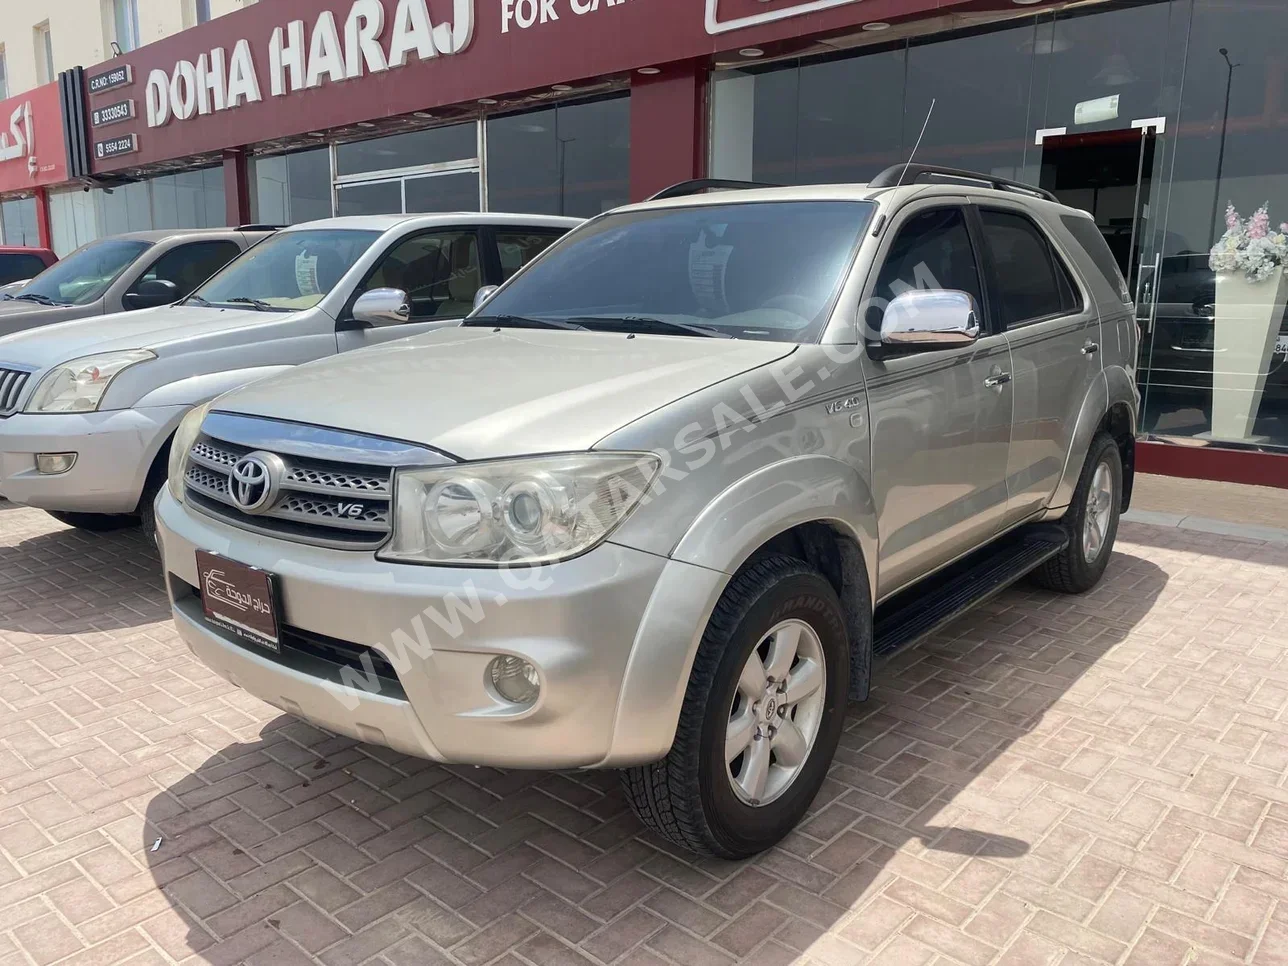 Toyota  Fortuner  2010  Automatic  198,000 Km  6 Cylinder  Four Wheel Drive (4WD)  SUV  Gold